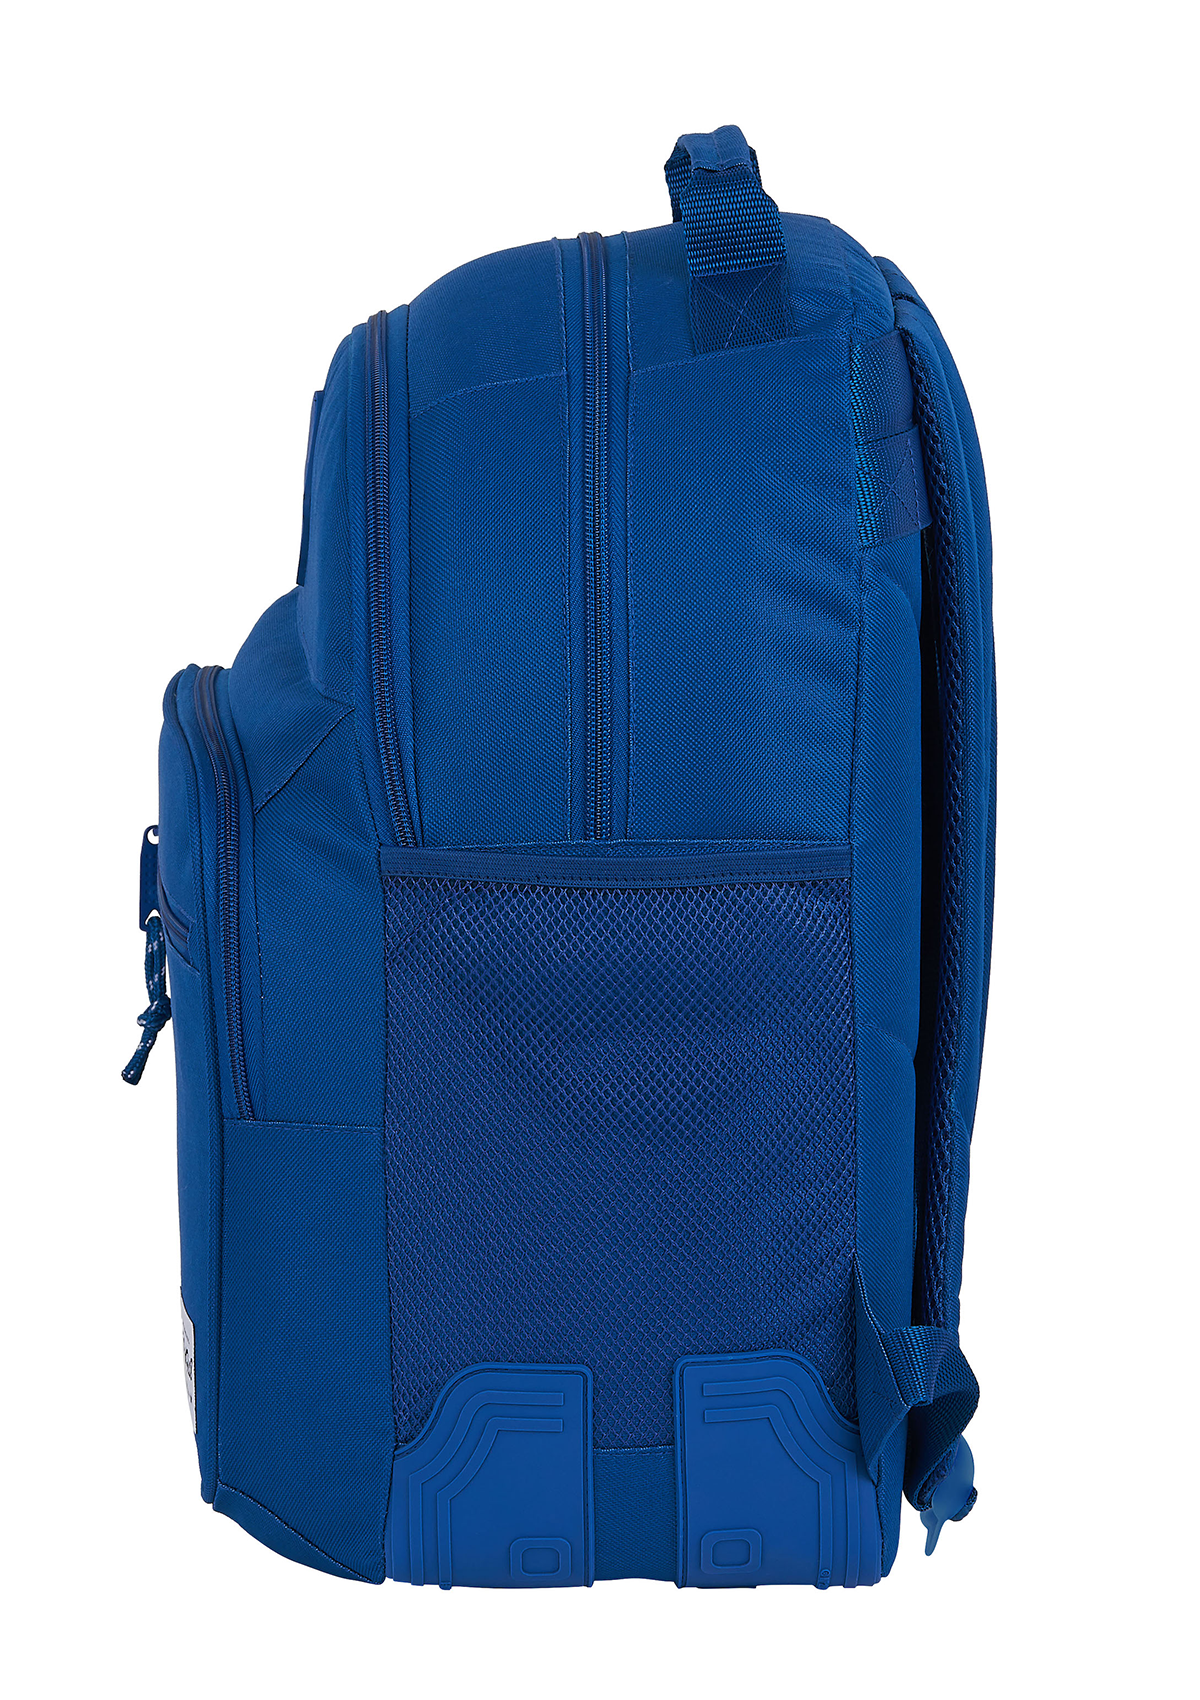 Blackfit8 Double Blue Oxford Large Backpack